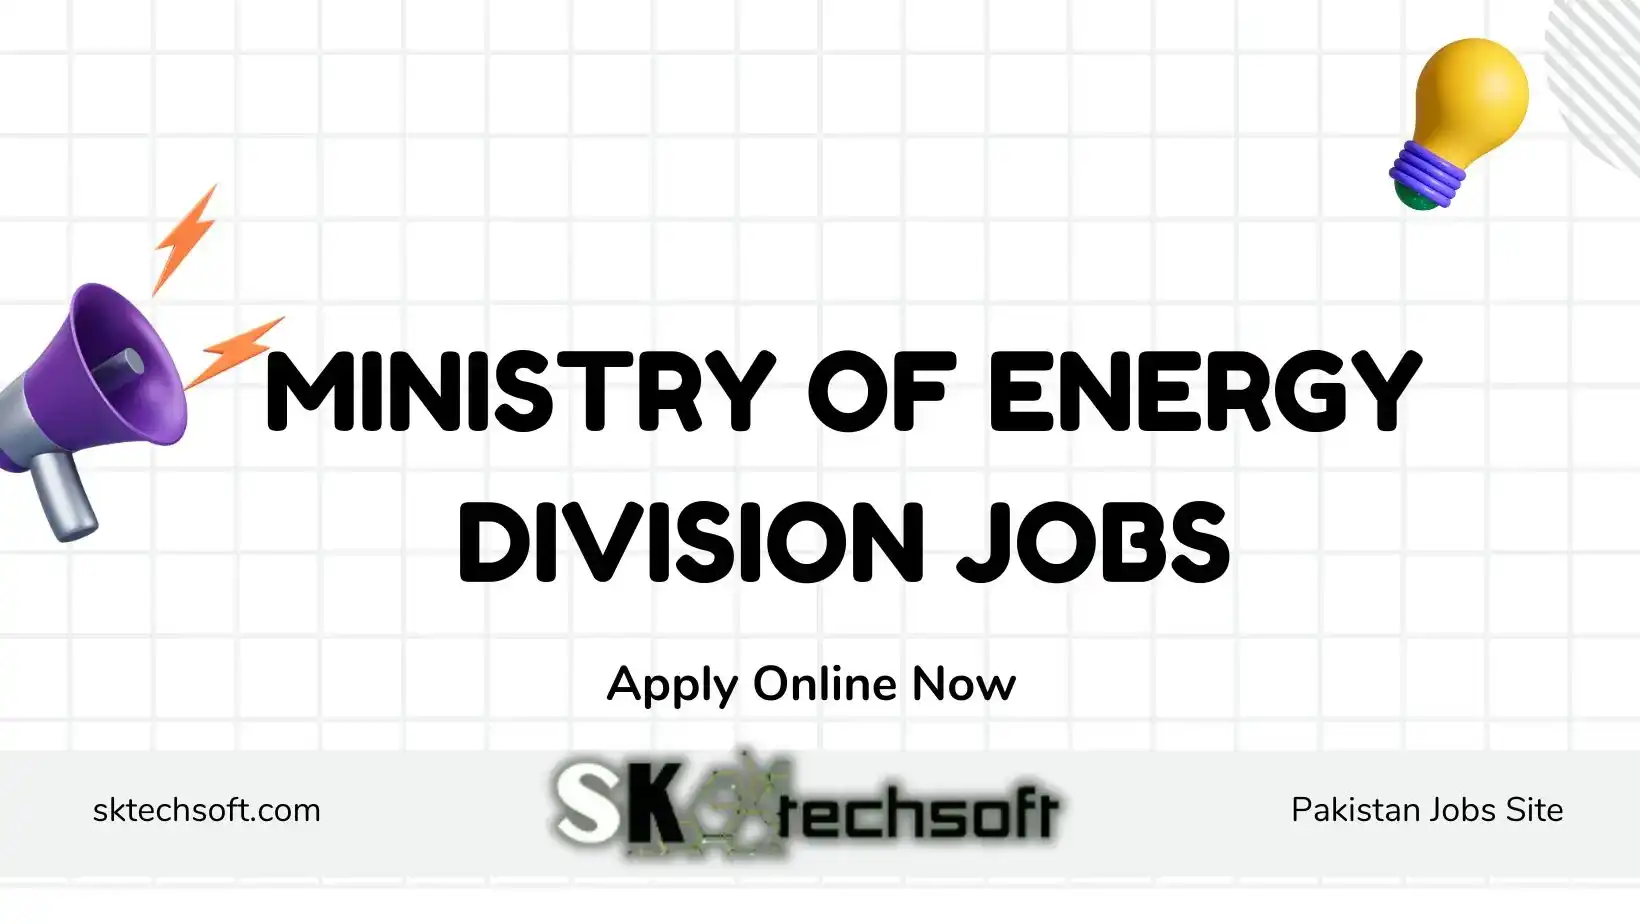 Ministry of Energy Division jobs